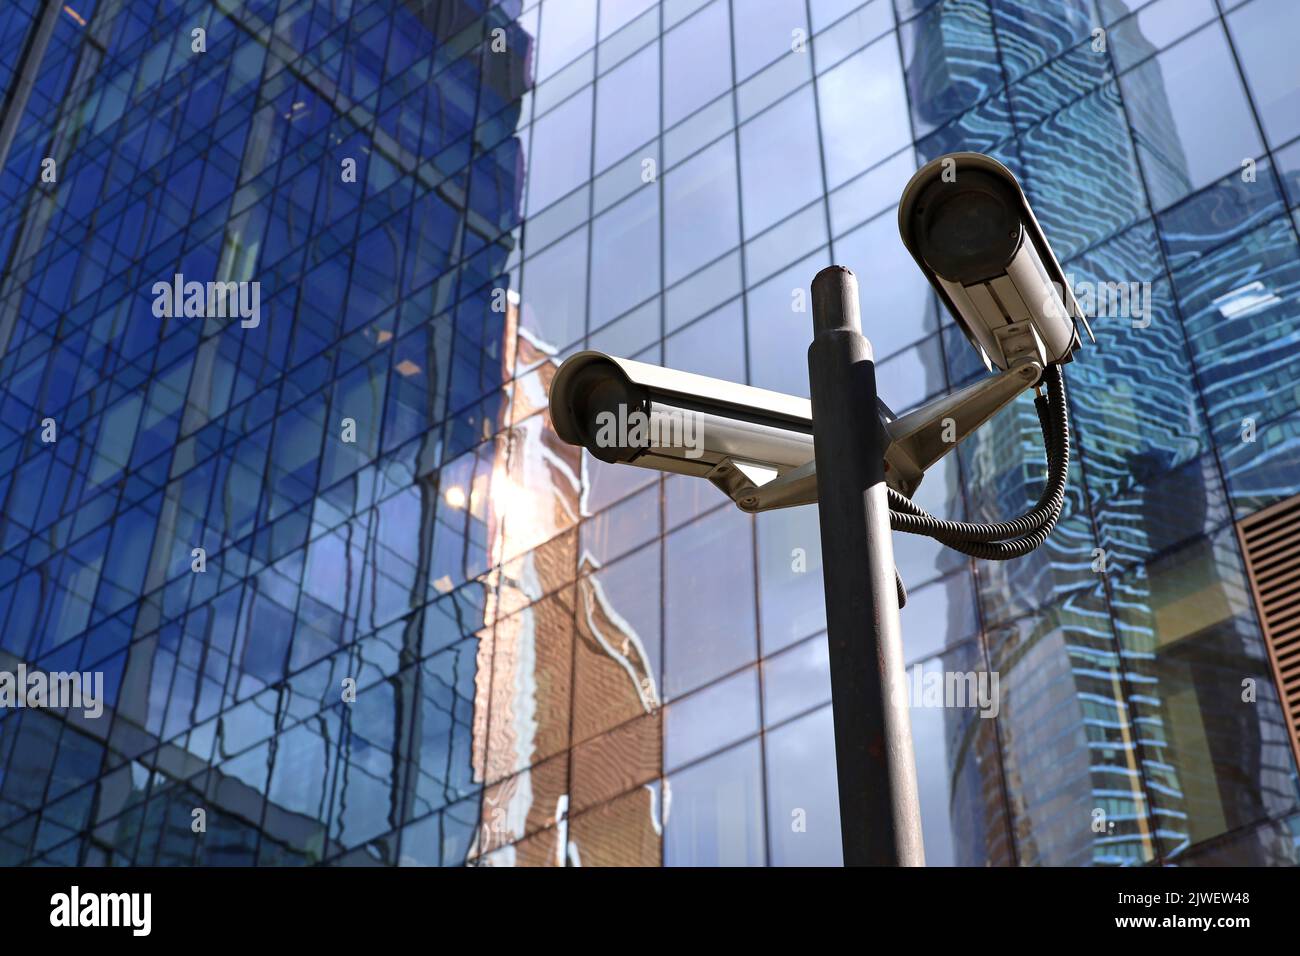 Outdoor surveillance video cameras on background of skyscraper tower. Cctv camera near business center, concept of security, privacy and protection Stock Photo